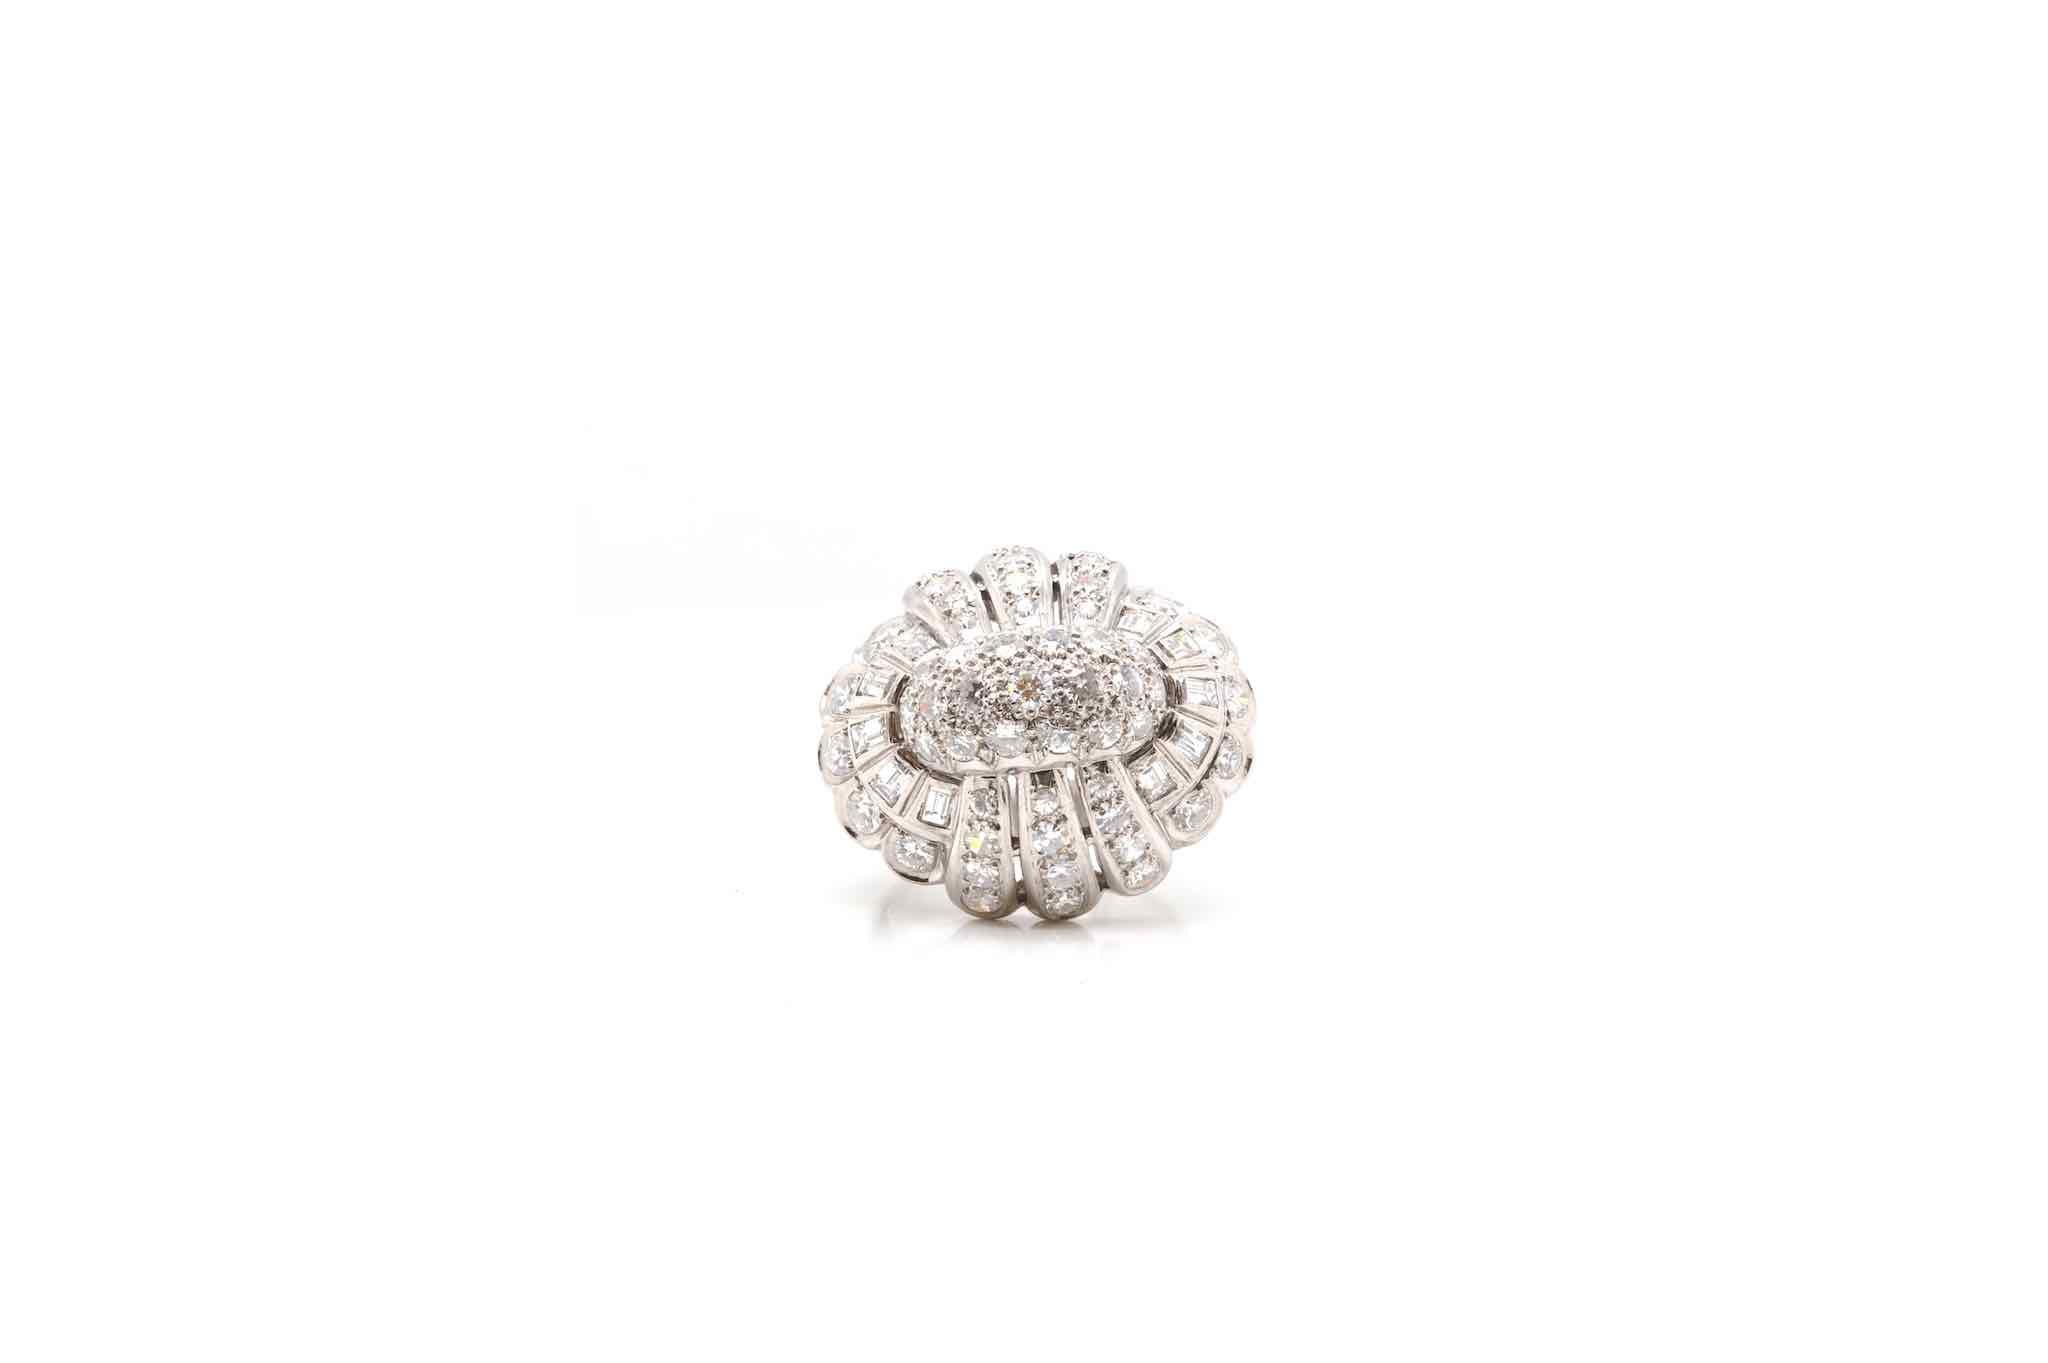 Stones: Brilliant cut diamonds
and baguettes for a total weight of 1.80 carats.
Material: Platinum
Dimensions: 23 mm length on finger, 15 mm height
Weight: 14.9g
Size: 55 (free sizing)
Certificate
Ref. : 24721